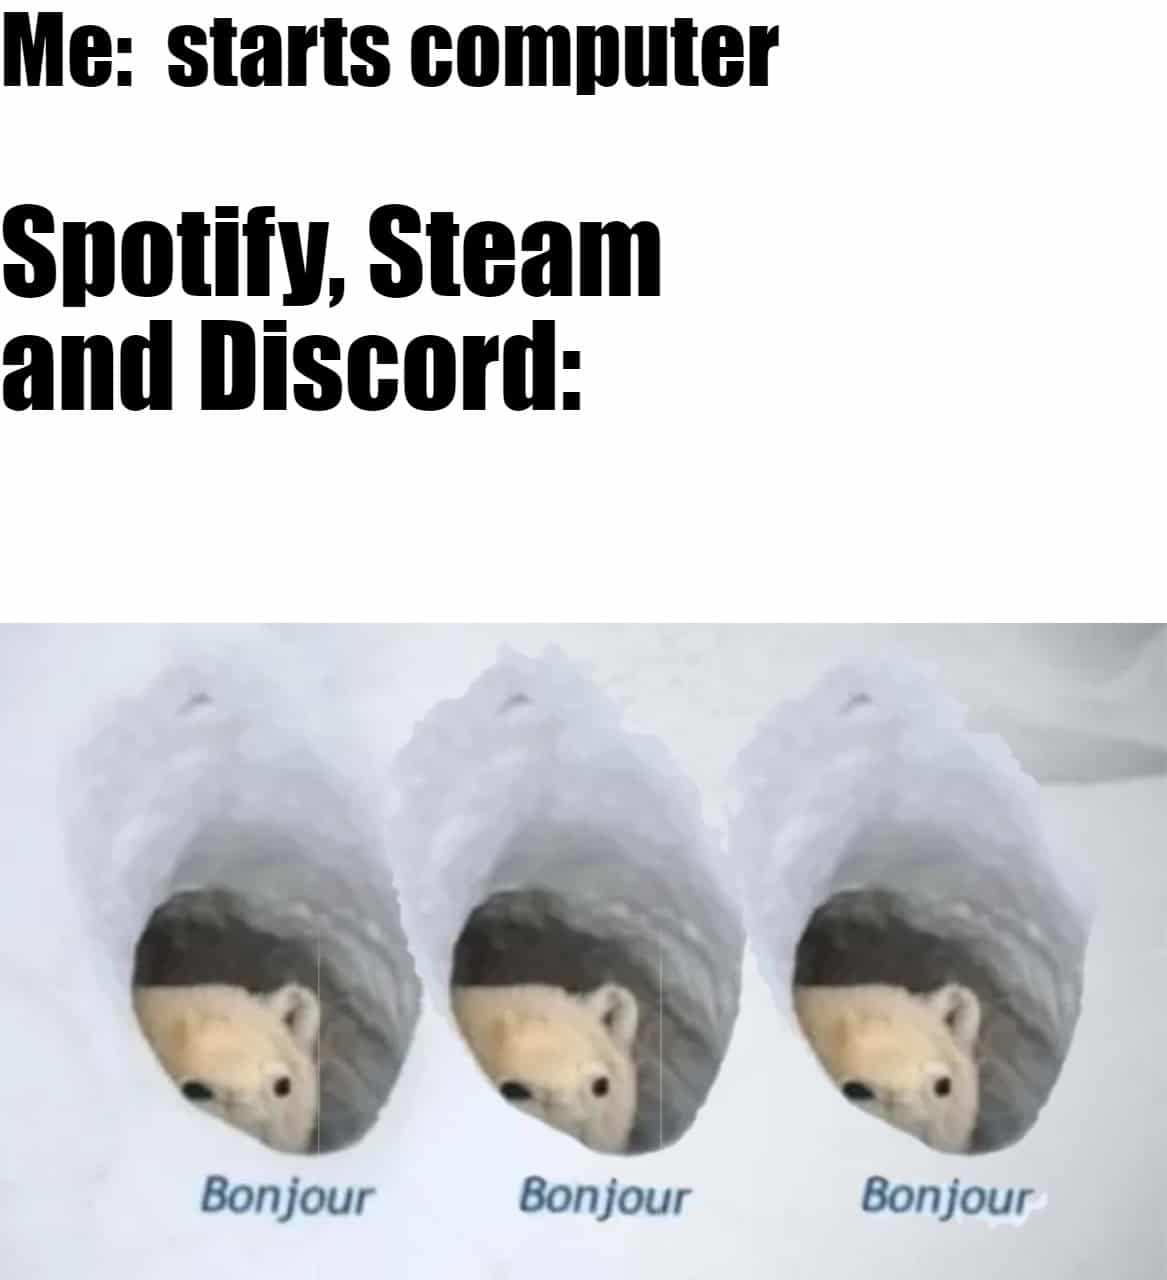 Funny, Spotify, Skype, Torrent, Startup, PC other memes Funny, Spotify, Skype, Torrent, Startup, PC text: Me: starts computer Spotify, Steam and Discord: Bonjour Bonjour Bonjour 